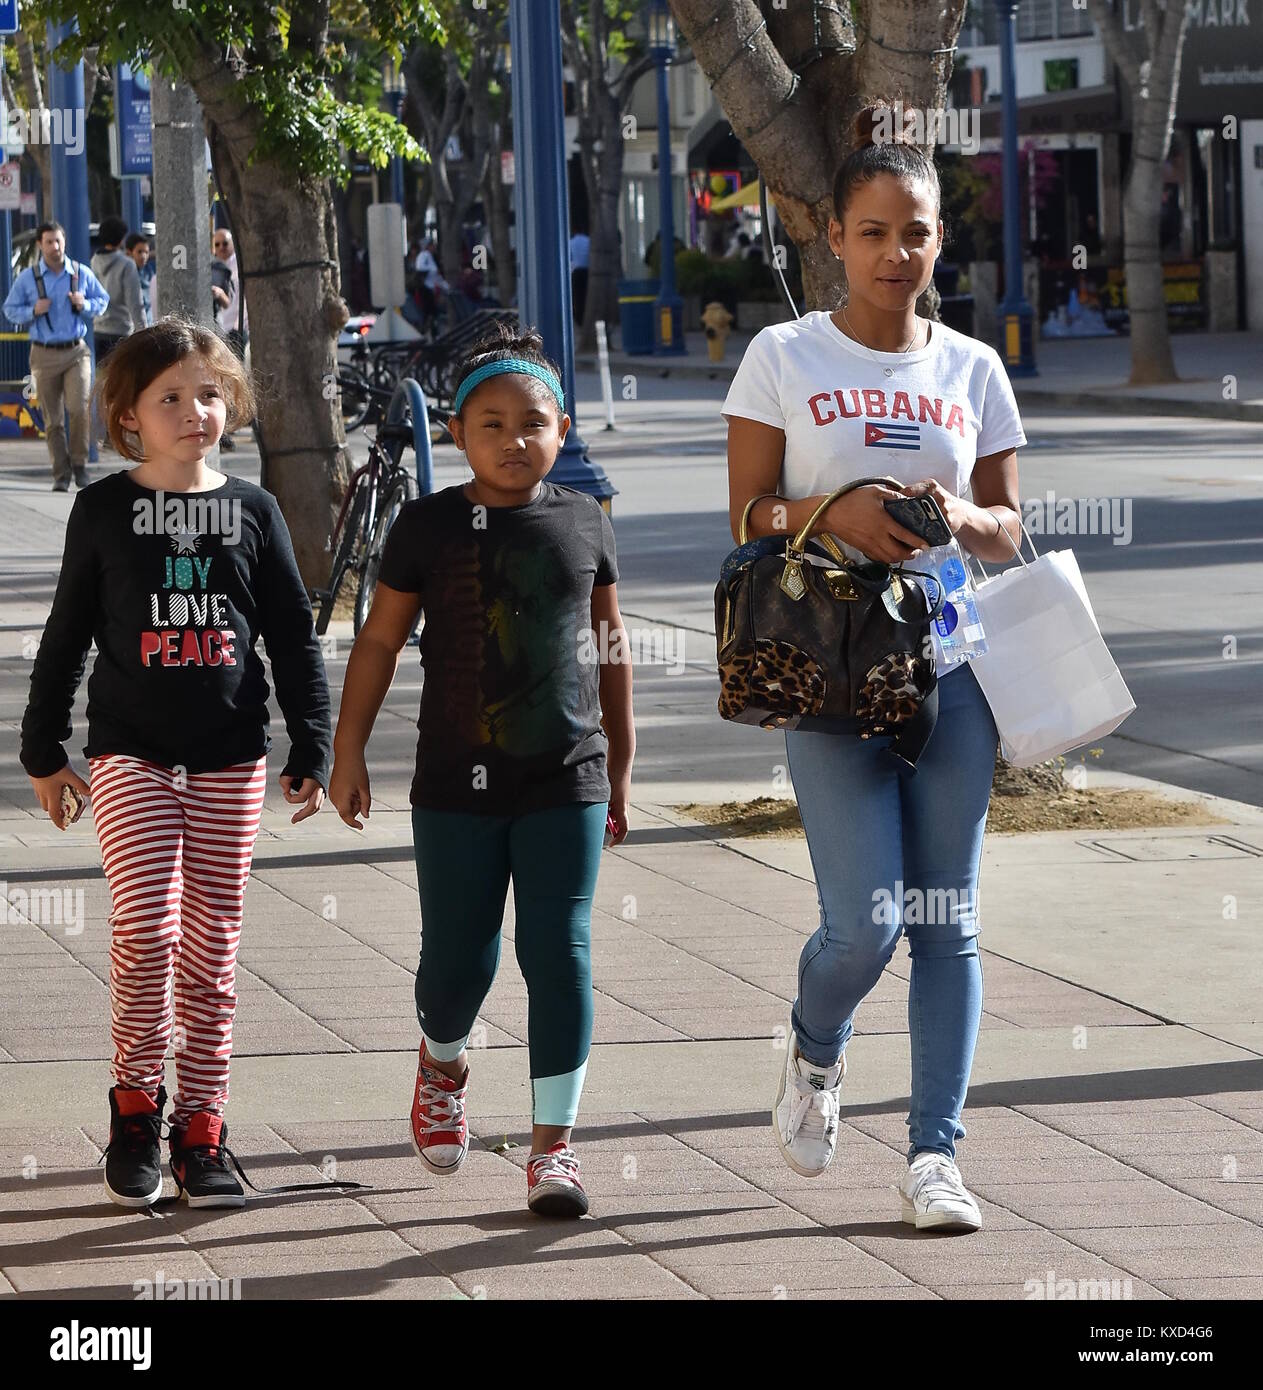 Christina Milian goes to Flame Broiler with her daughter and